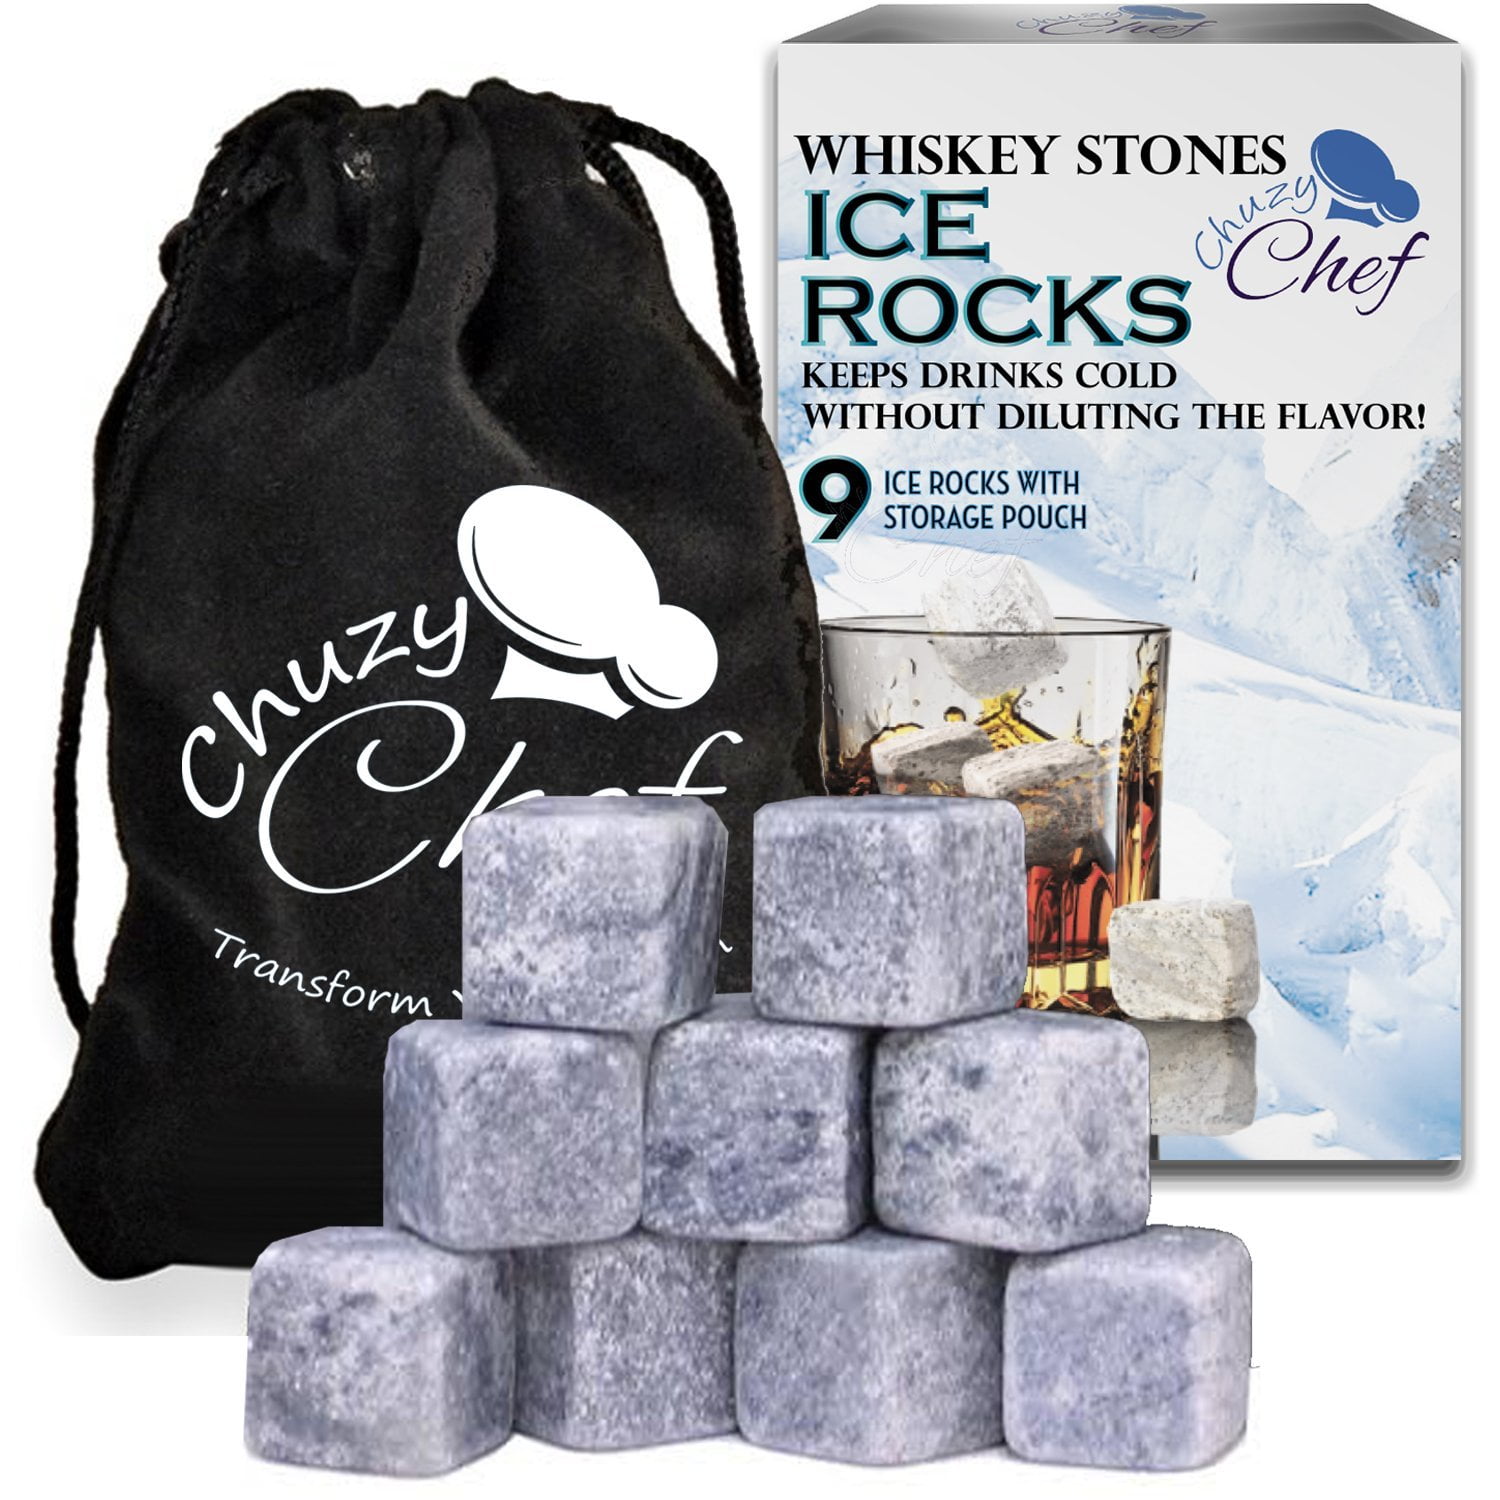 6 Gray Whisky Stones Chilling Cooling Cold Cool Wine Rocks Ice Cubes Pouch 